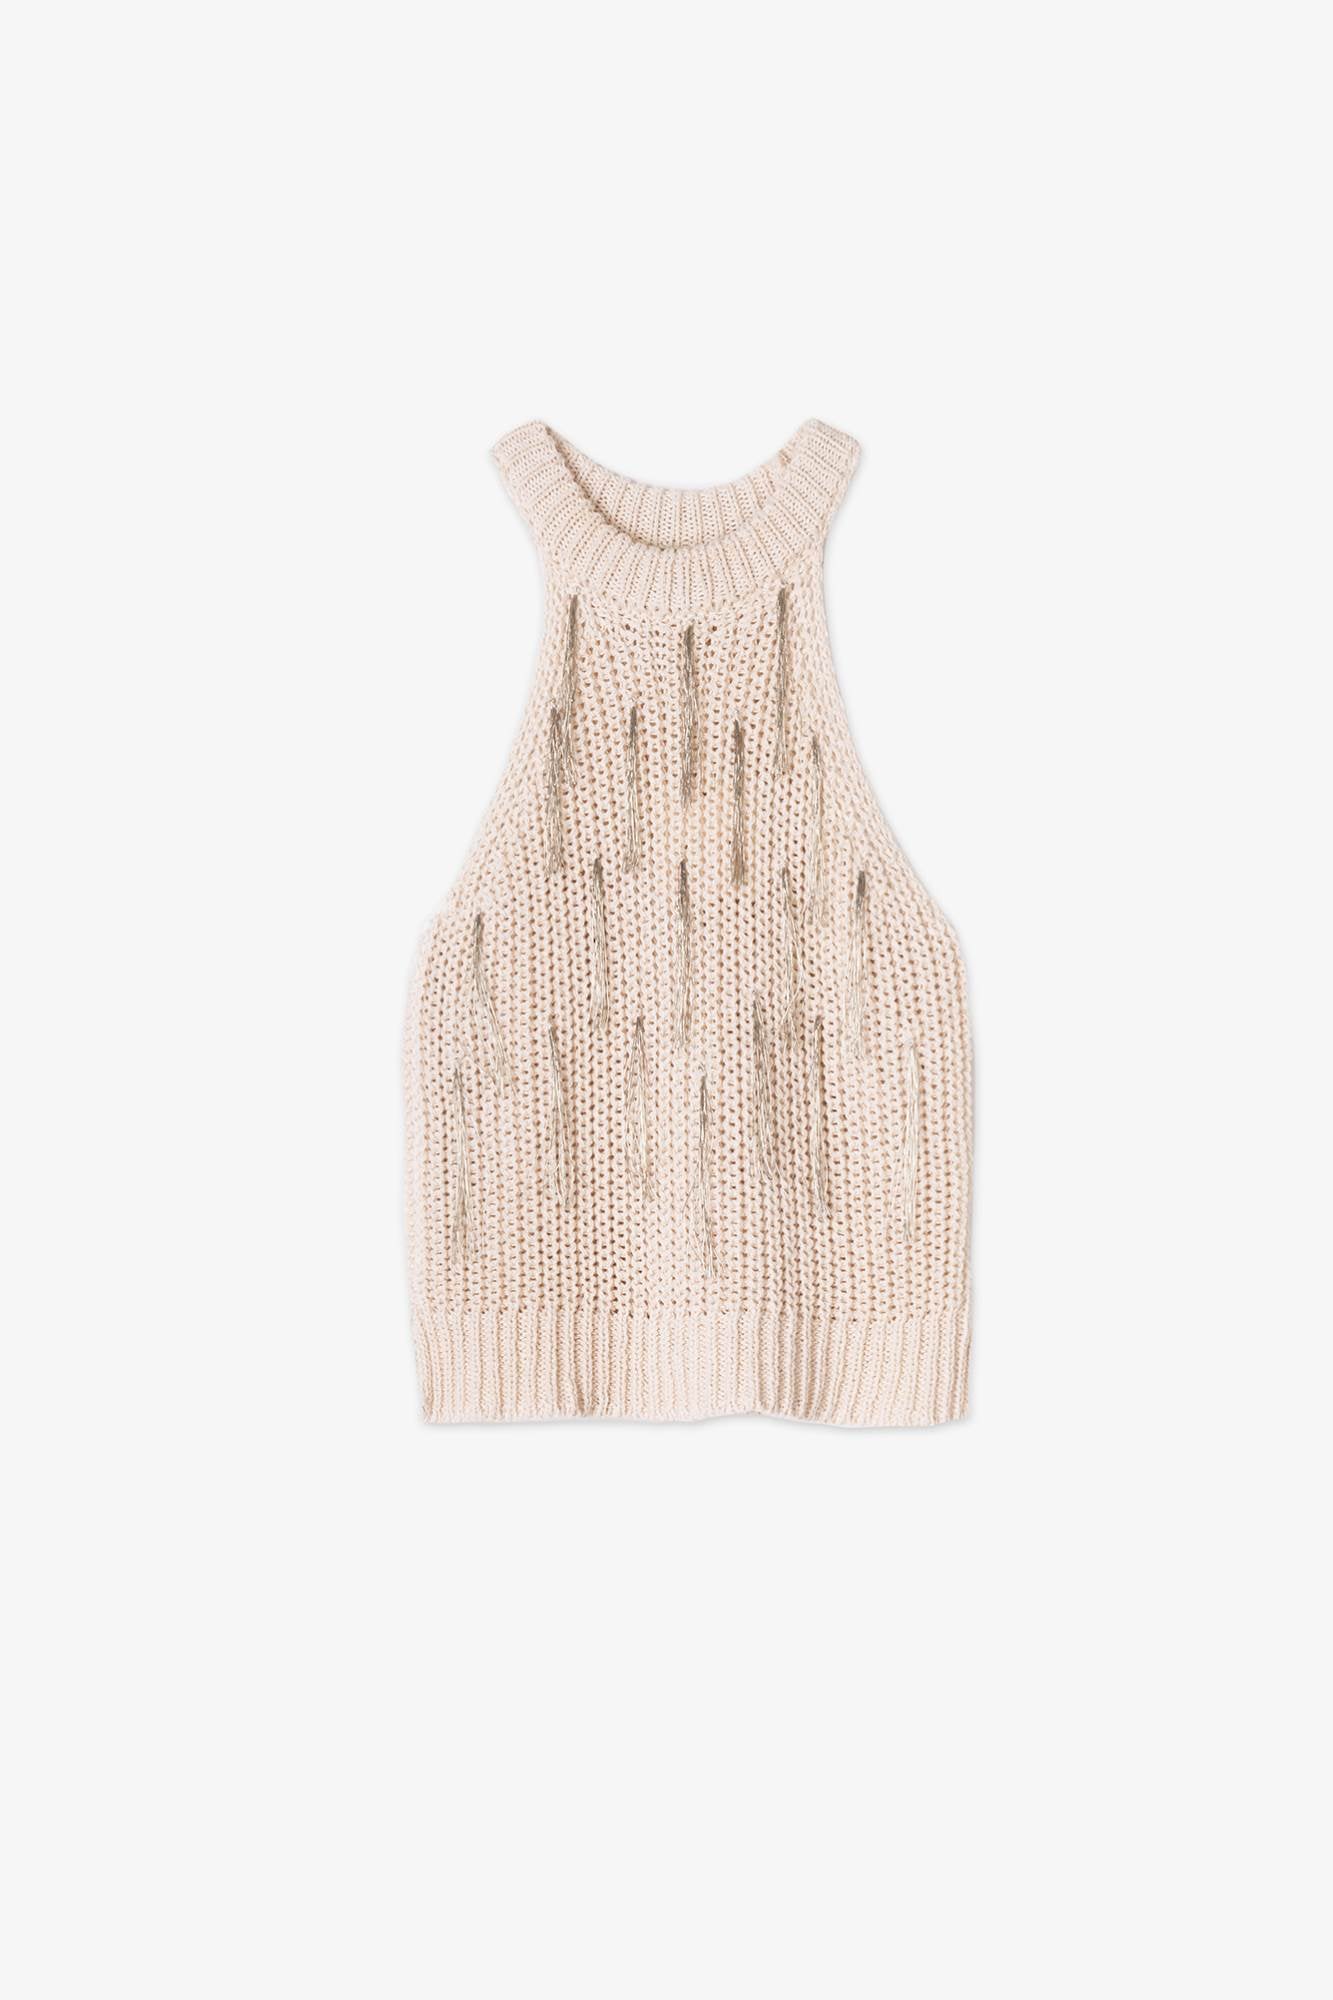 KNIT TOP WITH FRINGE EMBROIDERY